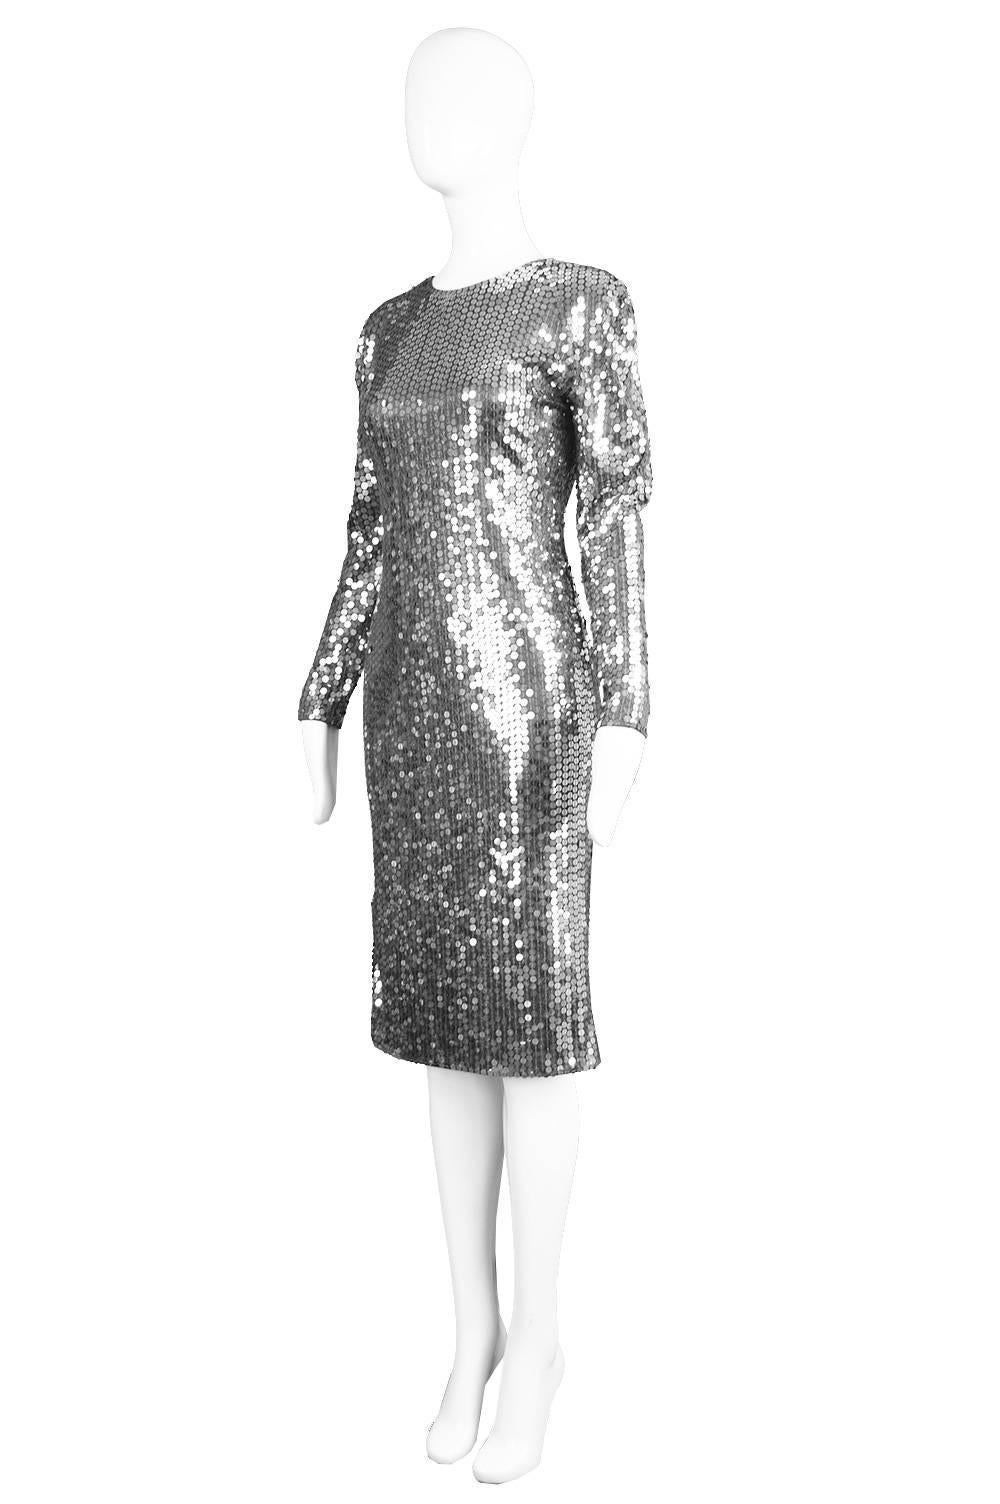 Halston Silver Sequin Dress with Deep Scoop Back, 1970s For Sale 1